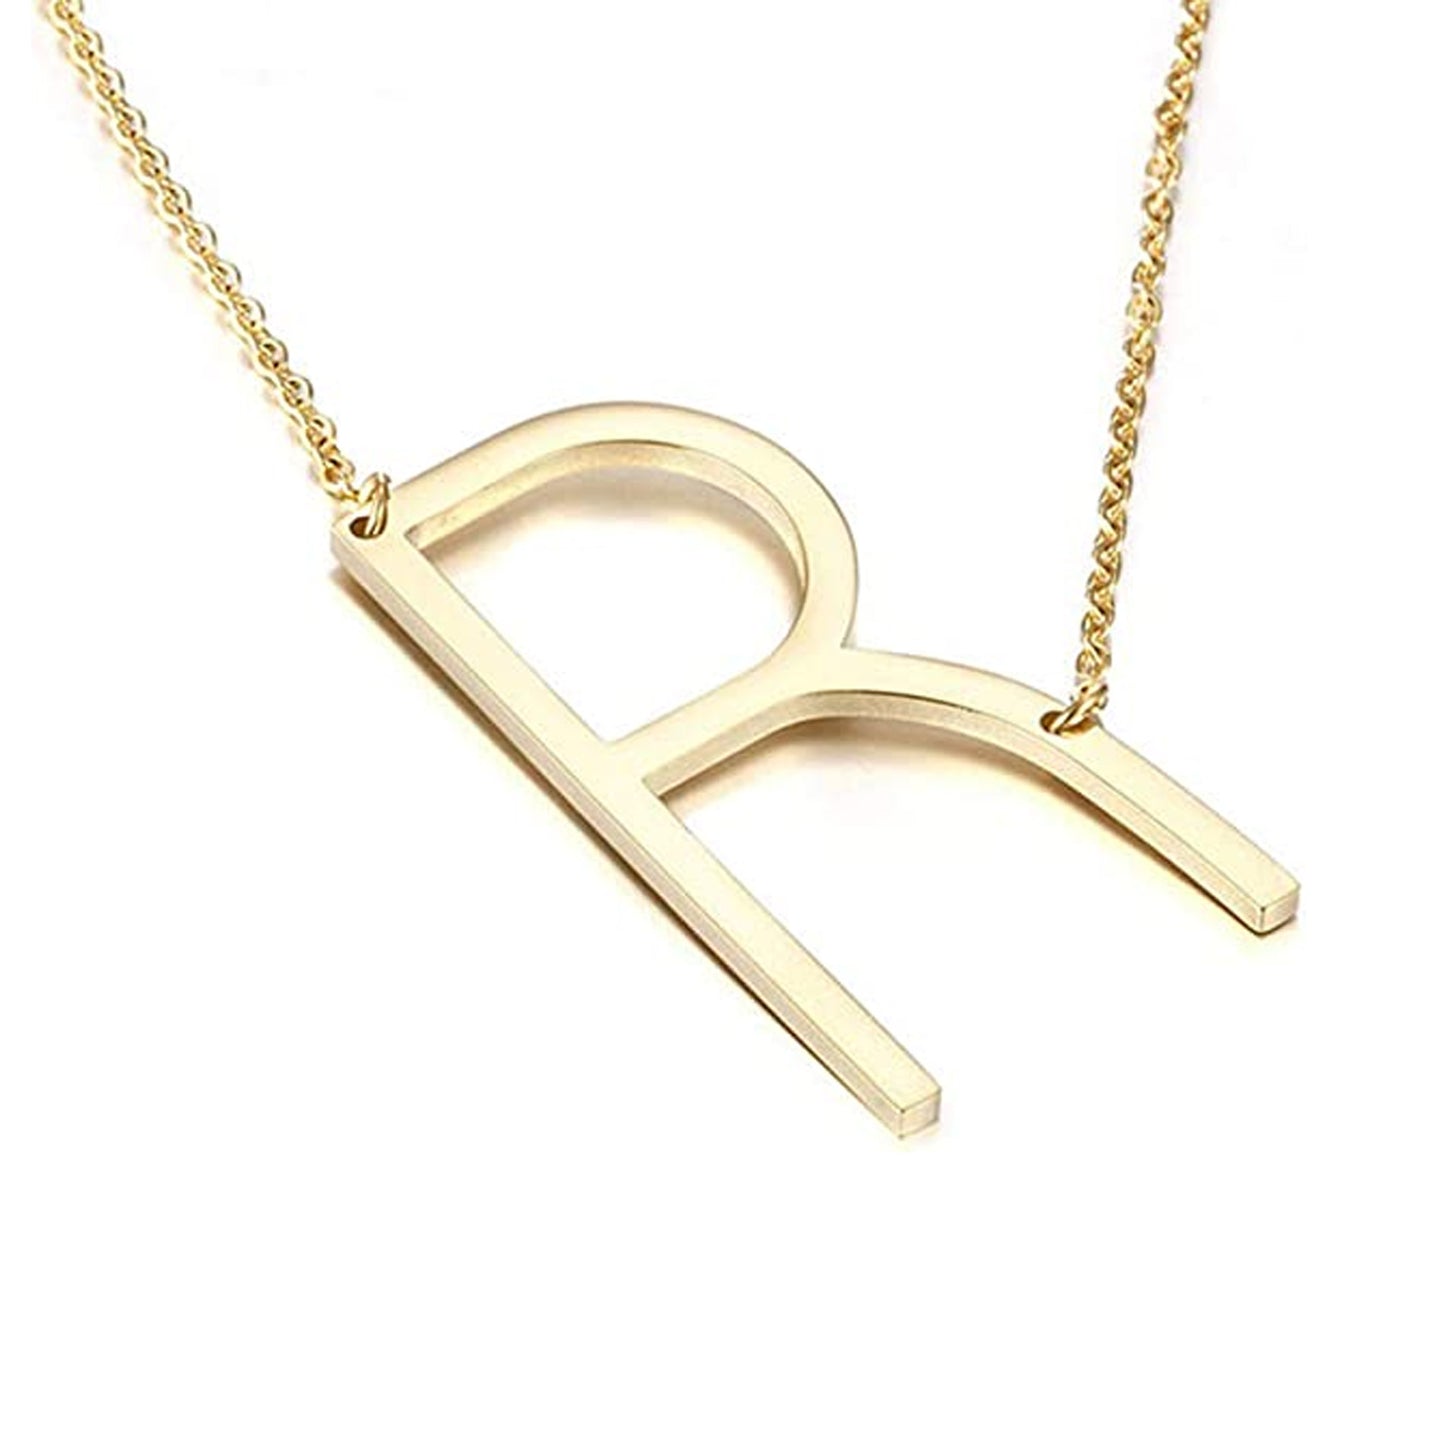 OFF SET INITIAL NECKLACE